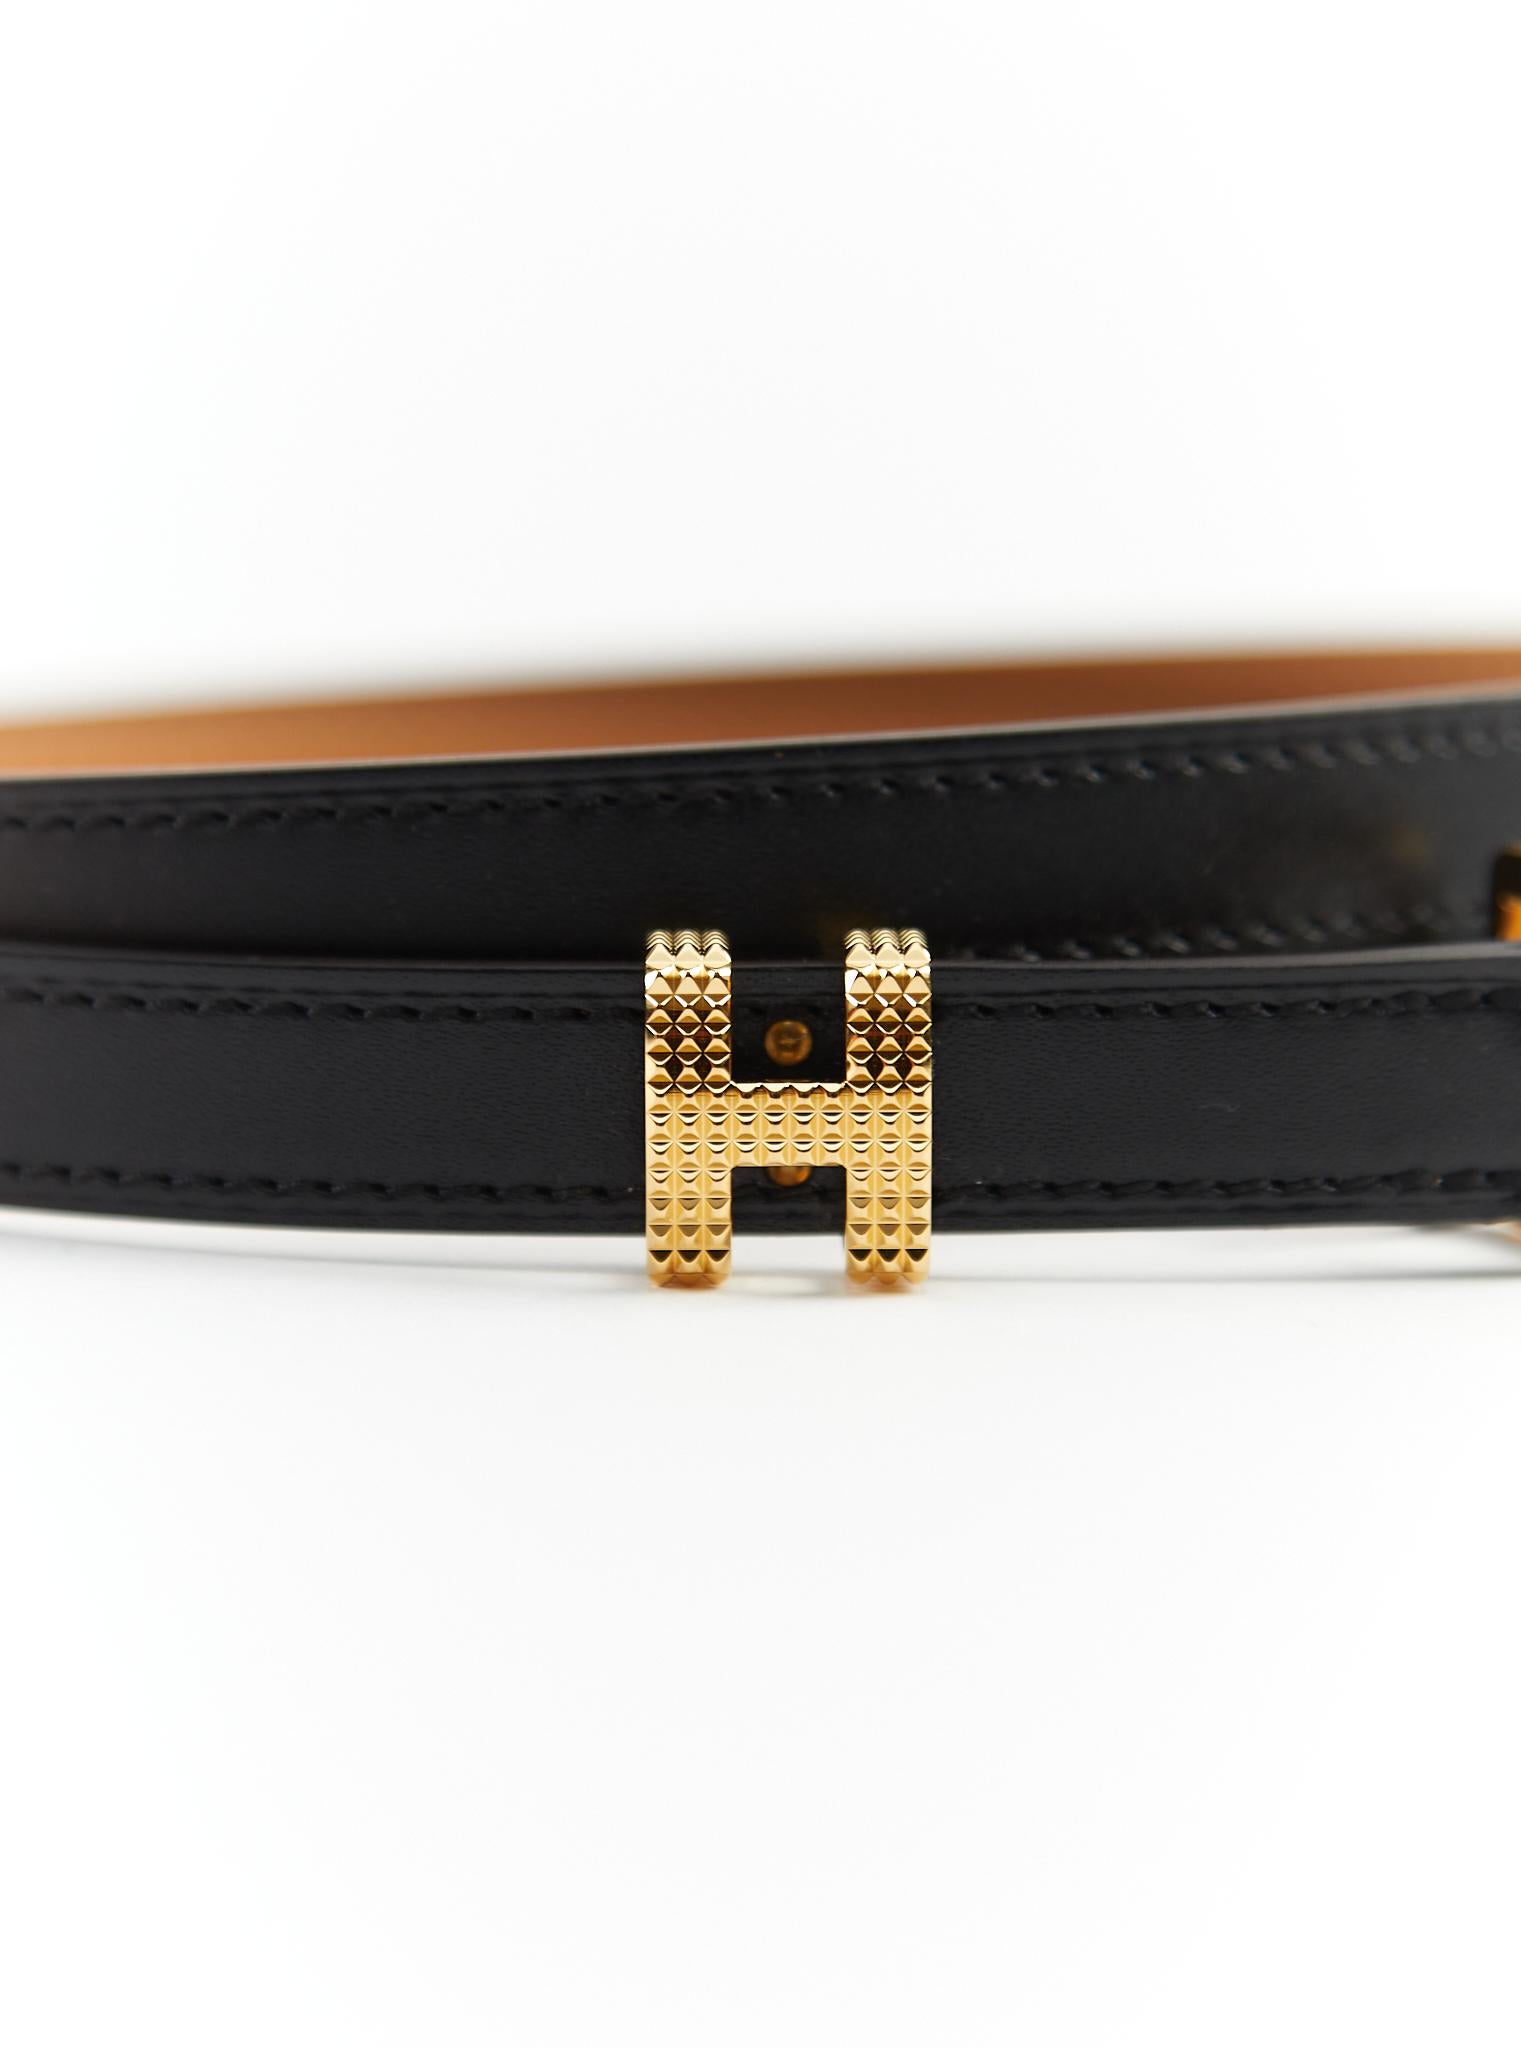 Hermès Pop H Guillochee Belt in Black

Box Leather with Gold Hardware

Size: 85cm

Width: 15mm